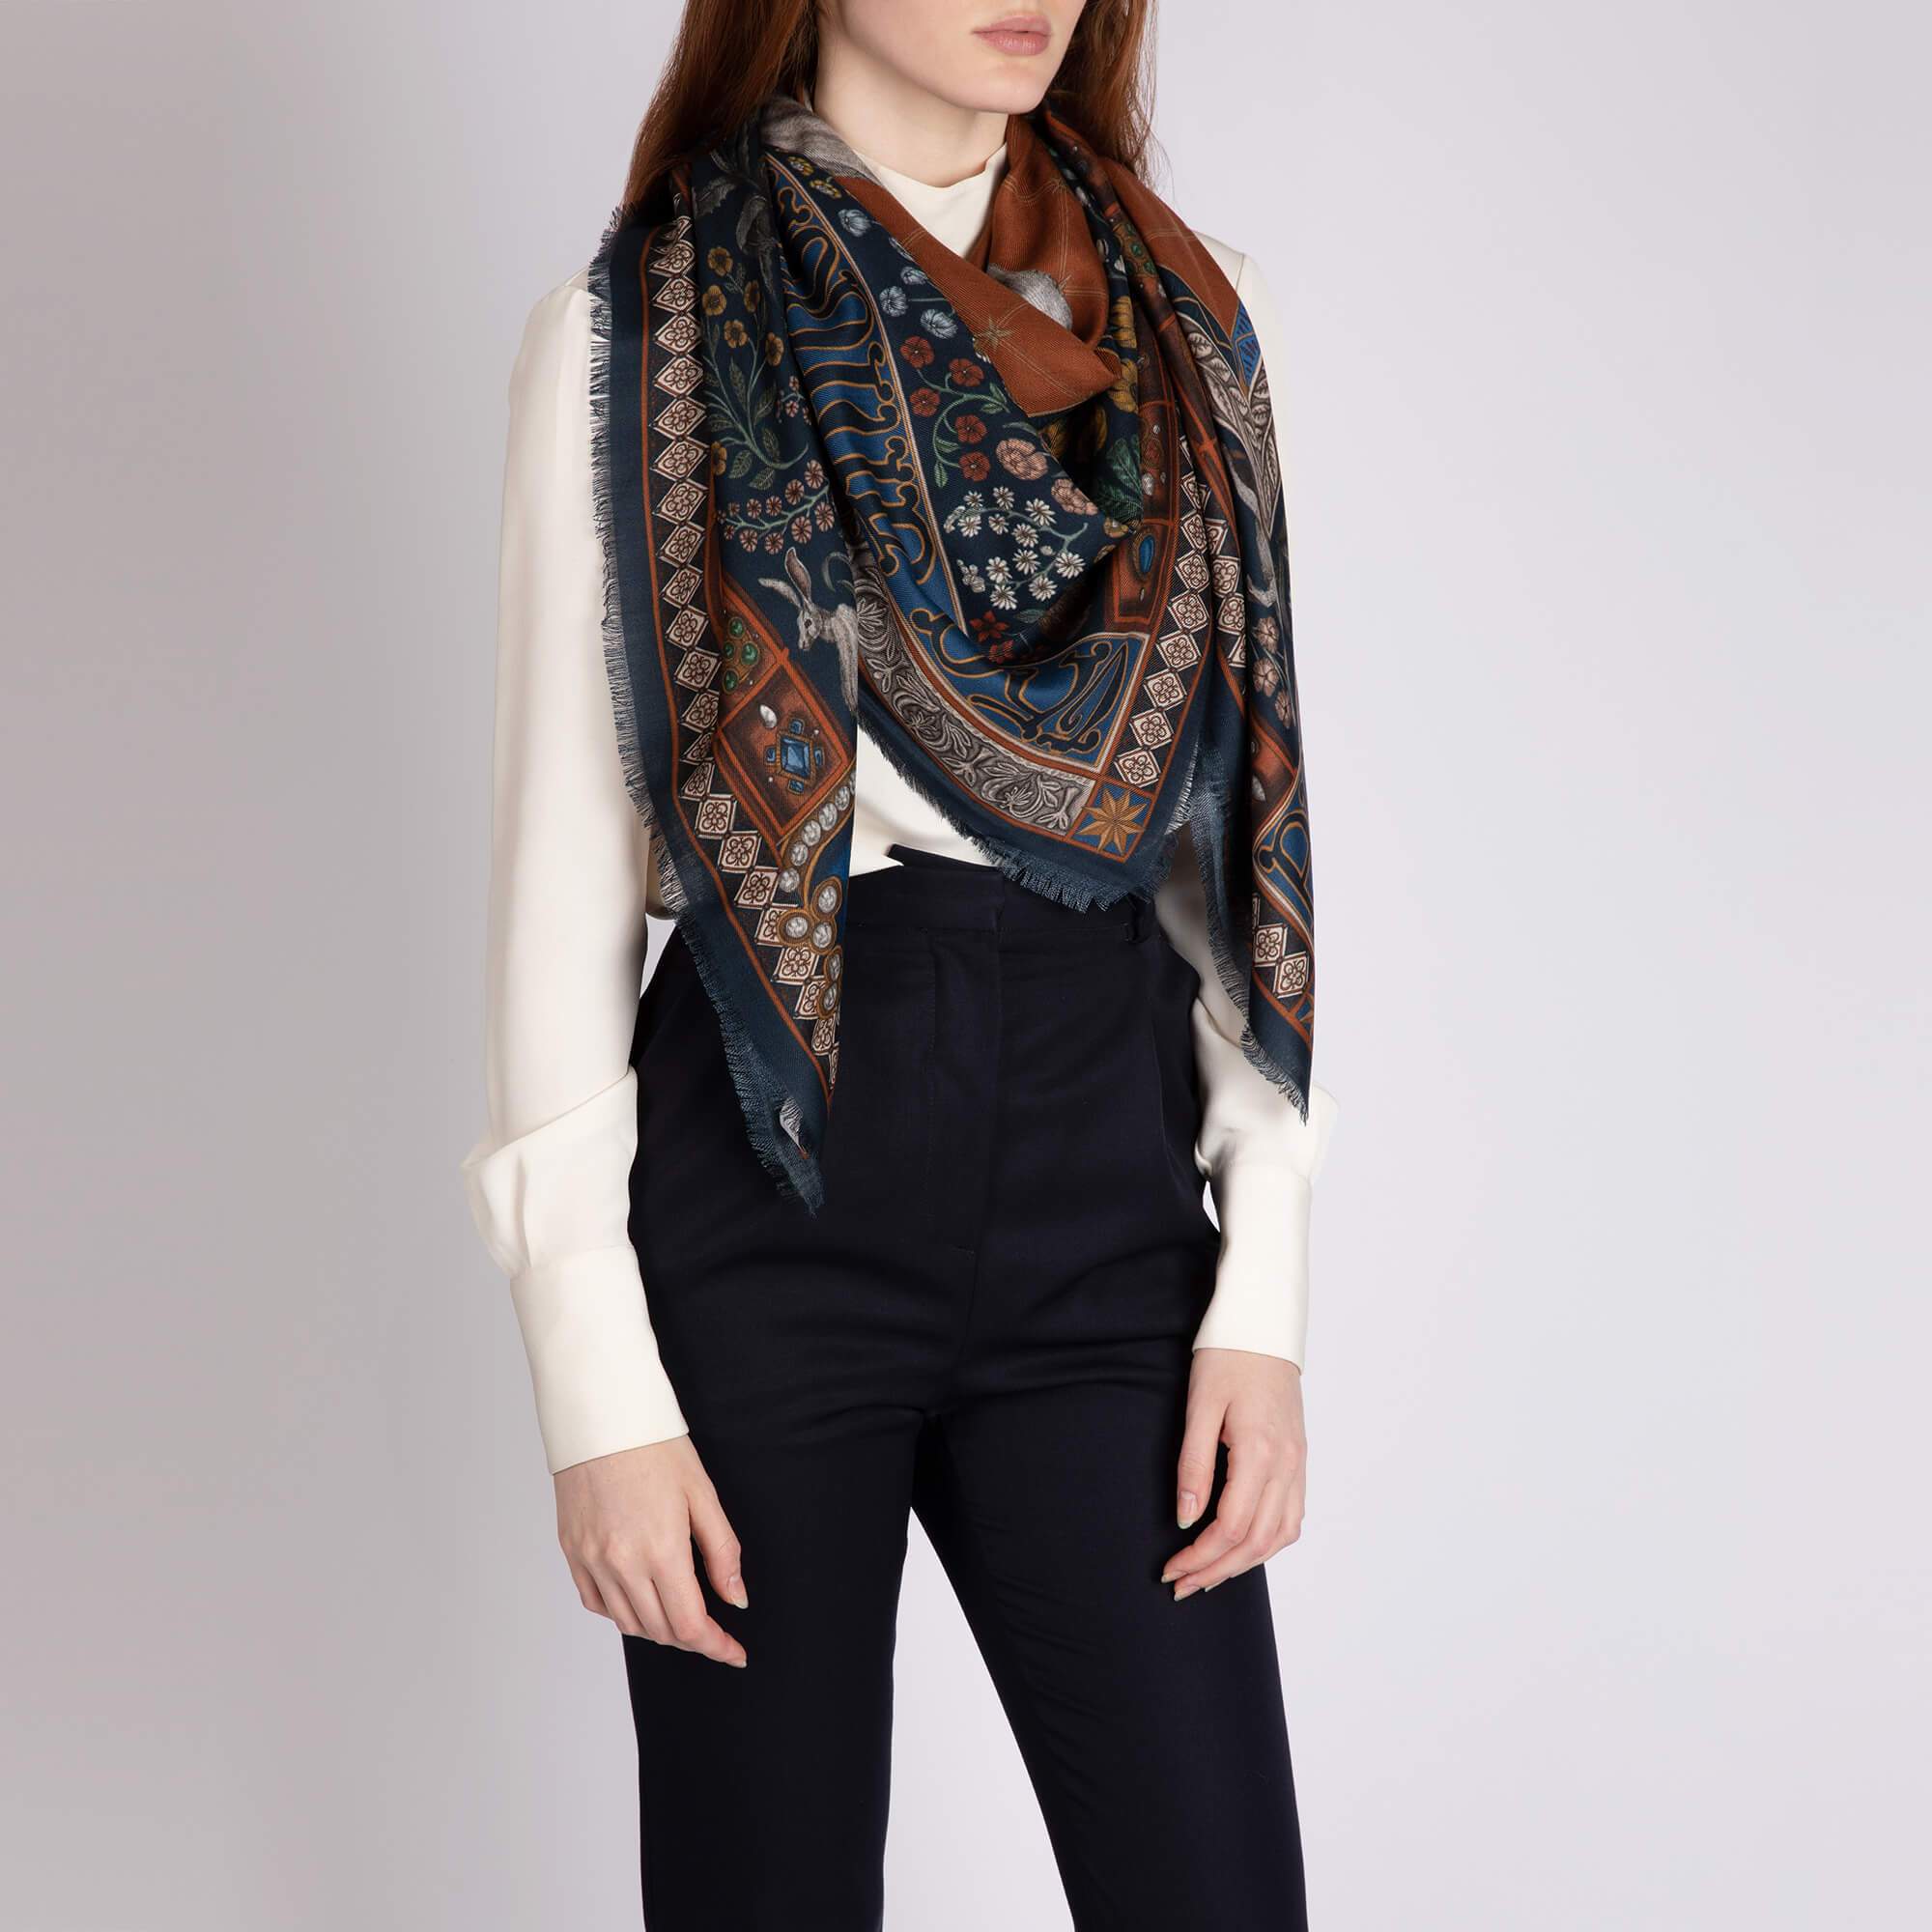 leporad stole scarf, Louis Vuitton Leopard Stole Scarf. I am so in love  with this scarf. Oh